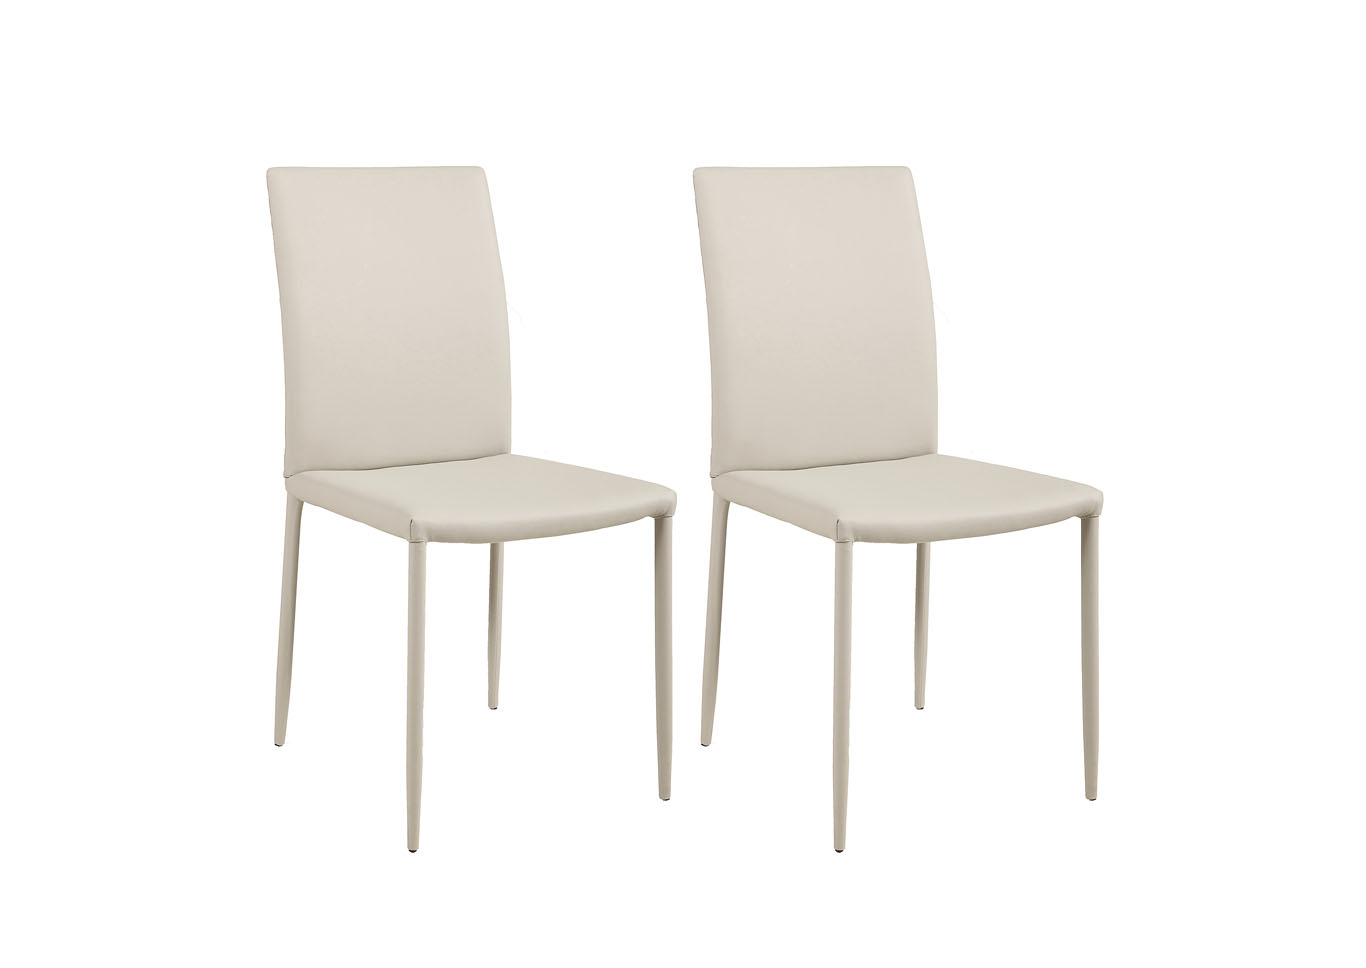 Gina Light Grey Fully Covered Tapered Leg Side Chair (Set of 2),Chintaly Imports